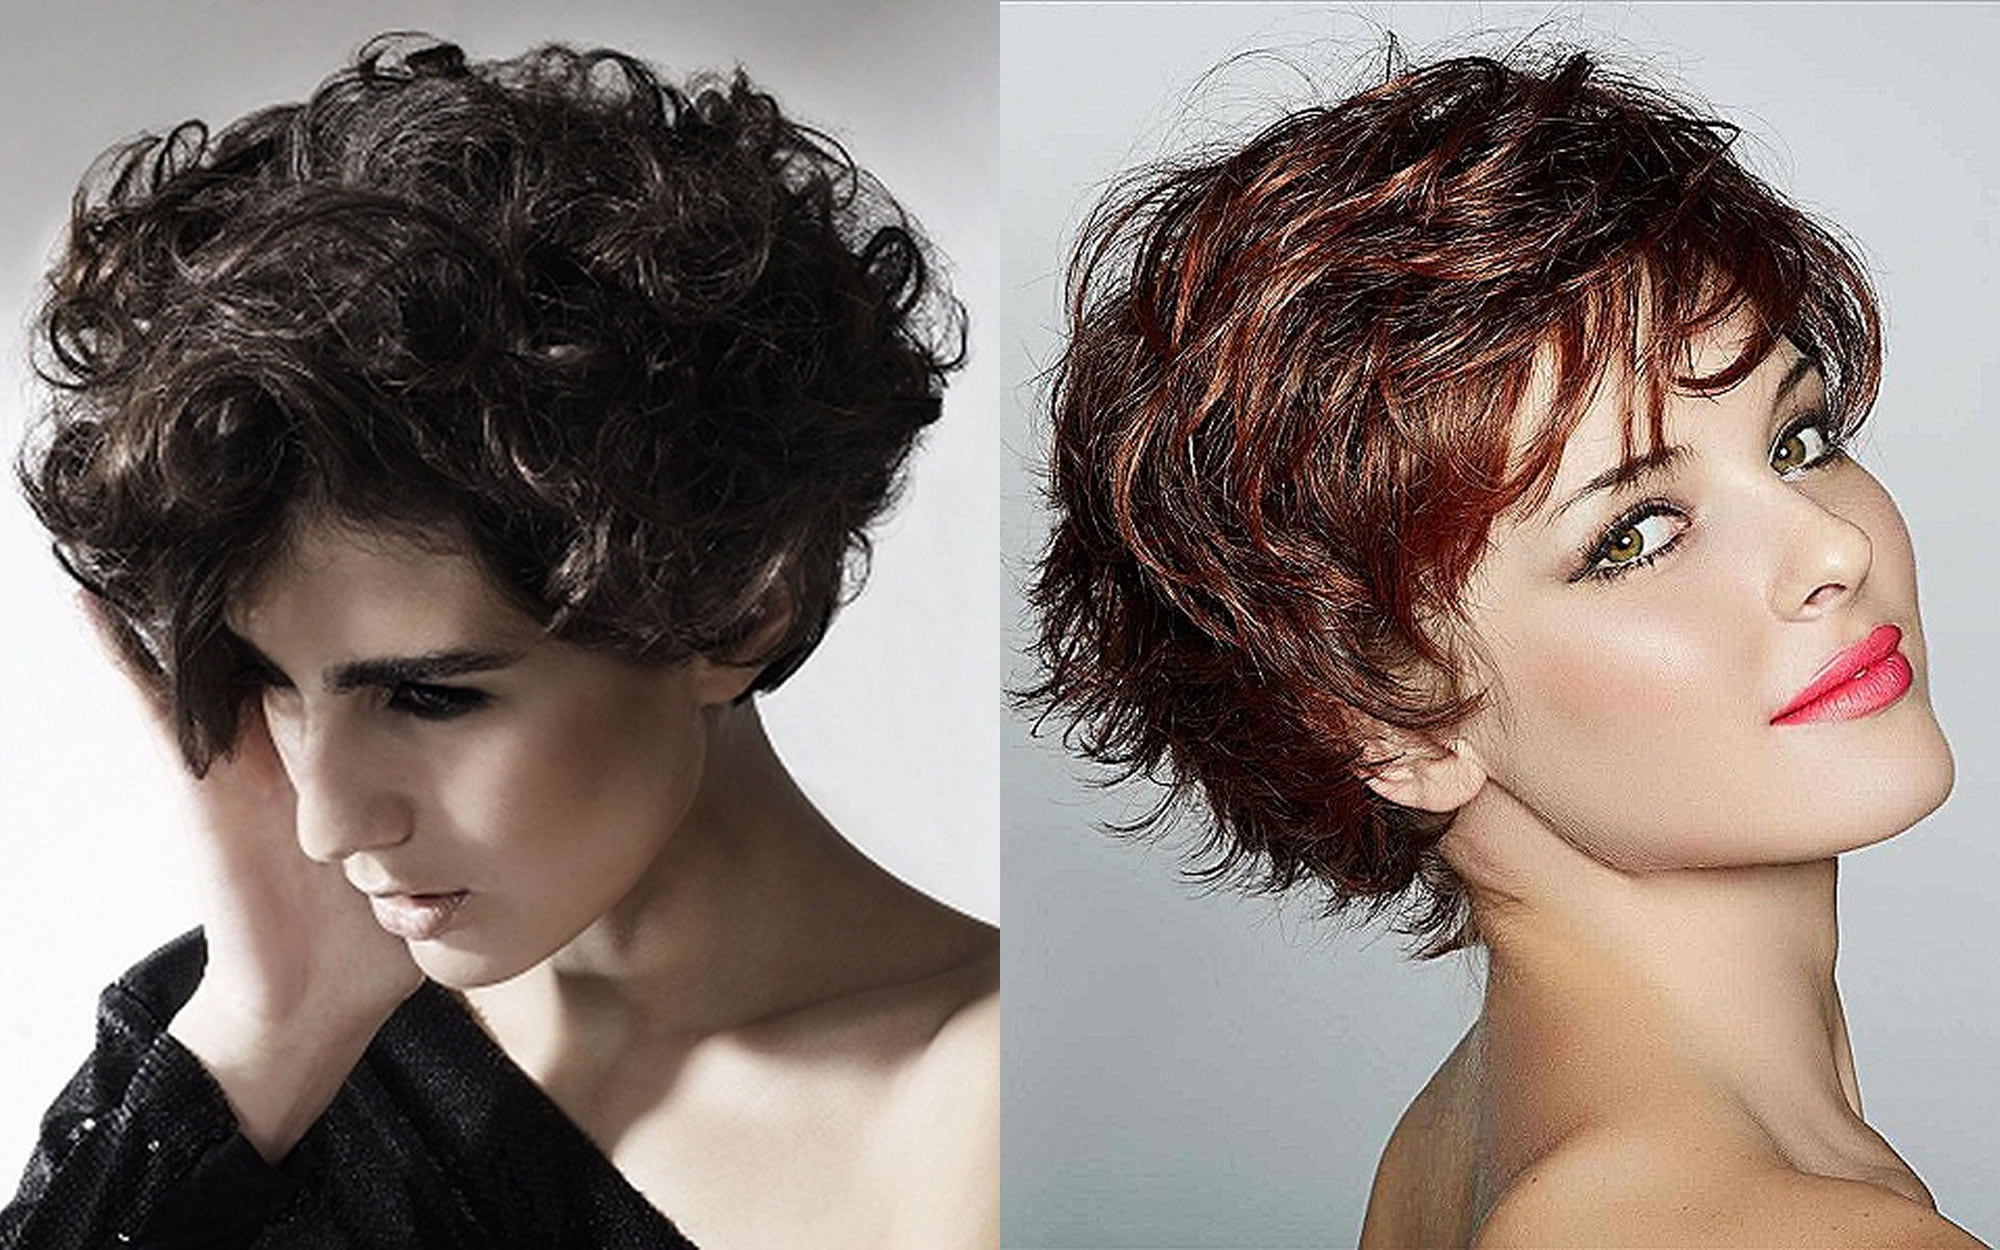 22 Best Curly Short Hairstyles for Women 2018-2019 - Page 3 of 6